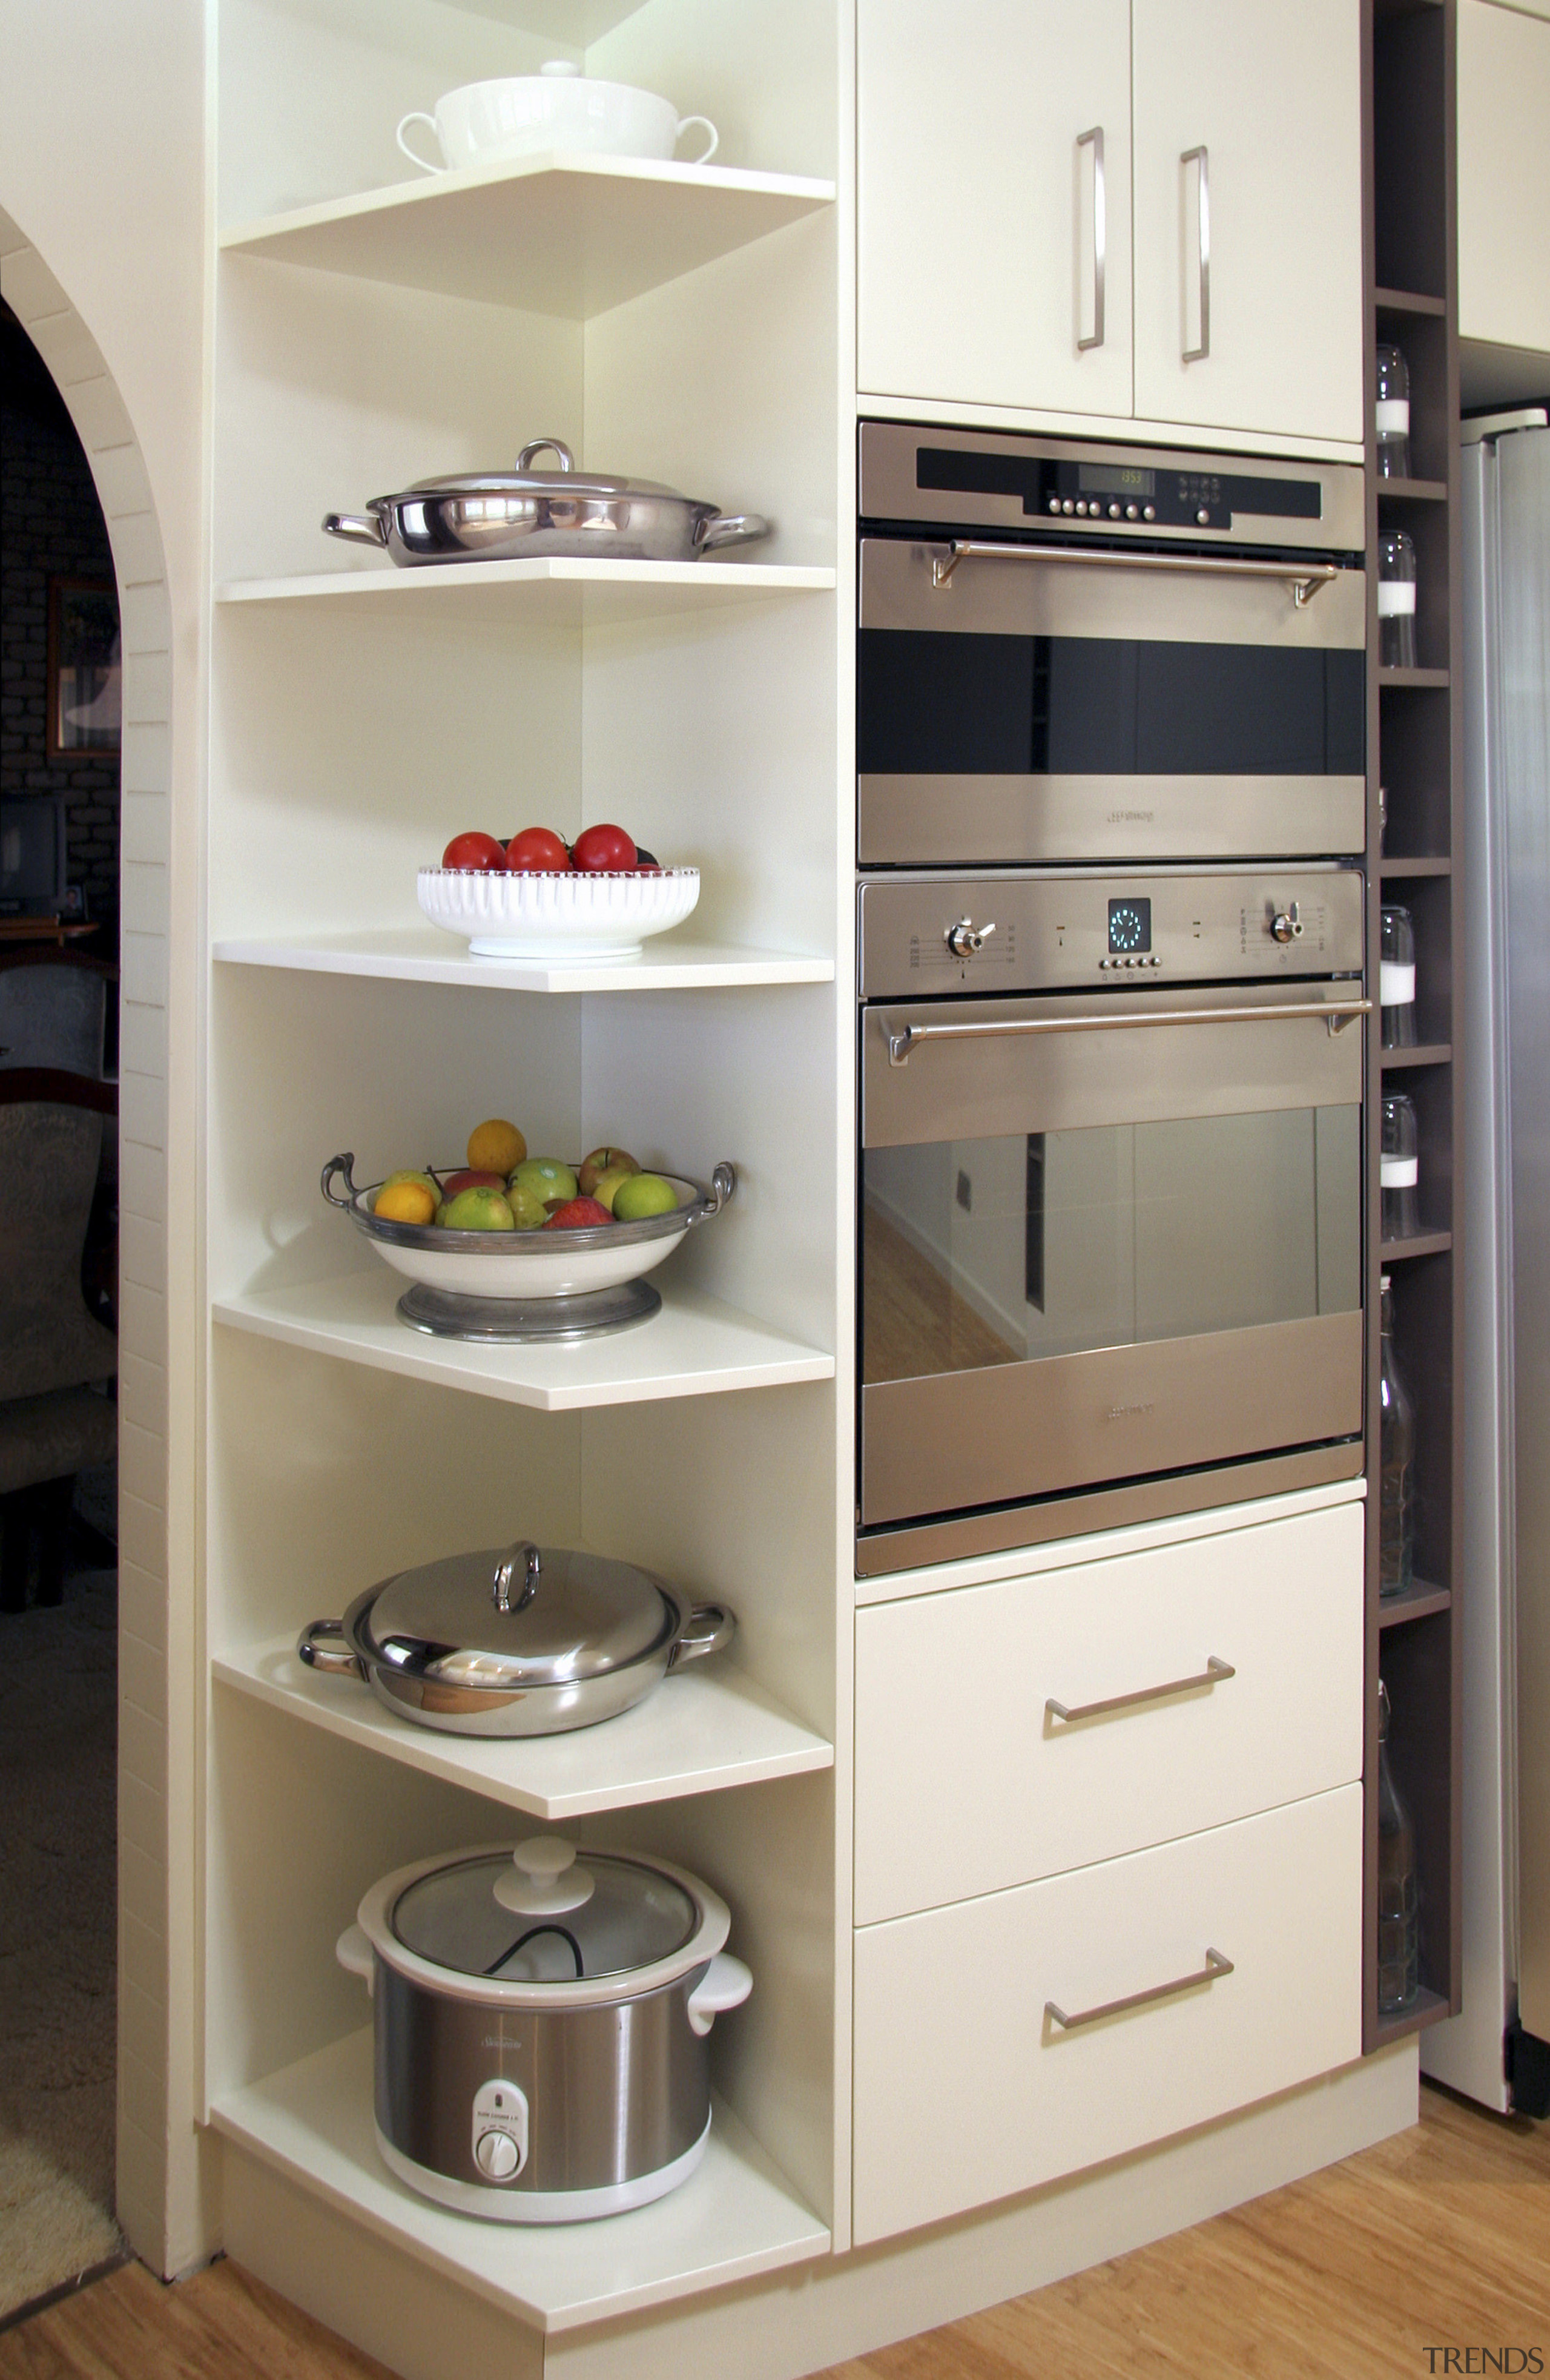 Image of Smeg appliances used in kitchen which cabinetry, closet, countertop, furniture, kitchen, room, shelf, shelving, gray